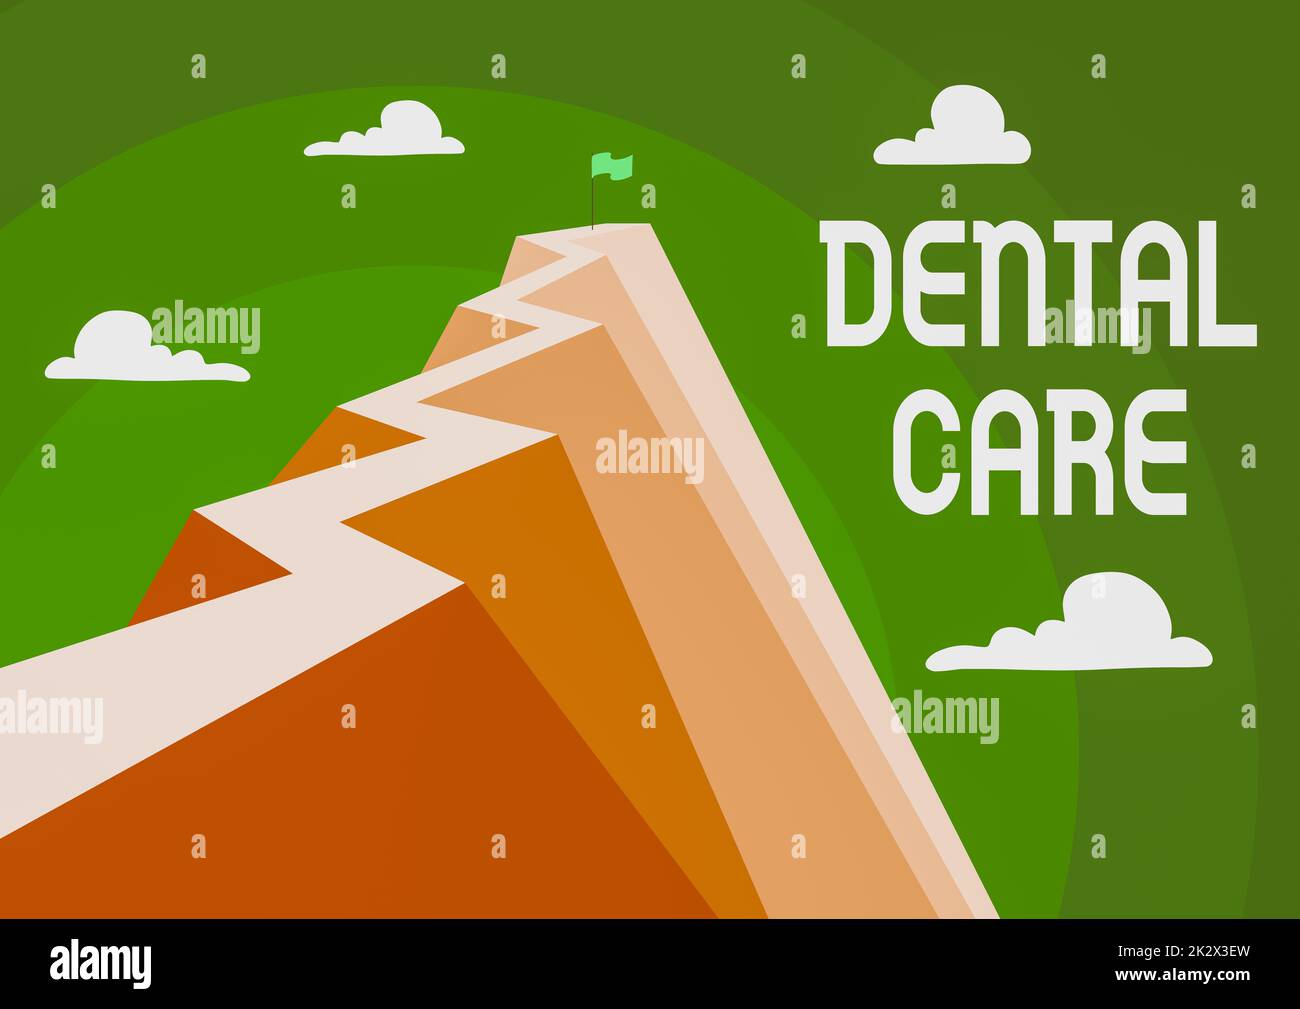 Text caption presenting Dental Care. Business showcase maintenance of healthy teeth or to keep it clean for future Mountain showing high road symbolizing reaching goals successfully. Stock Photo